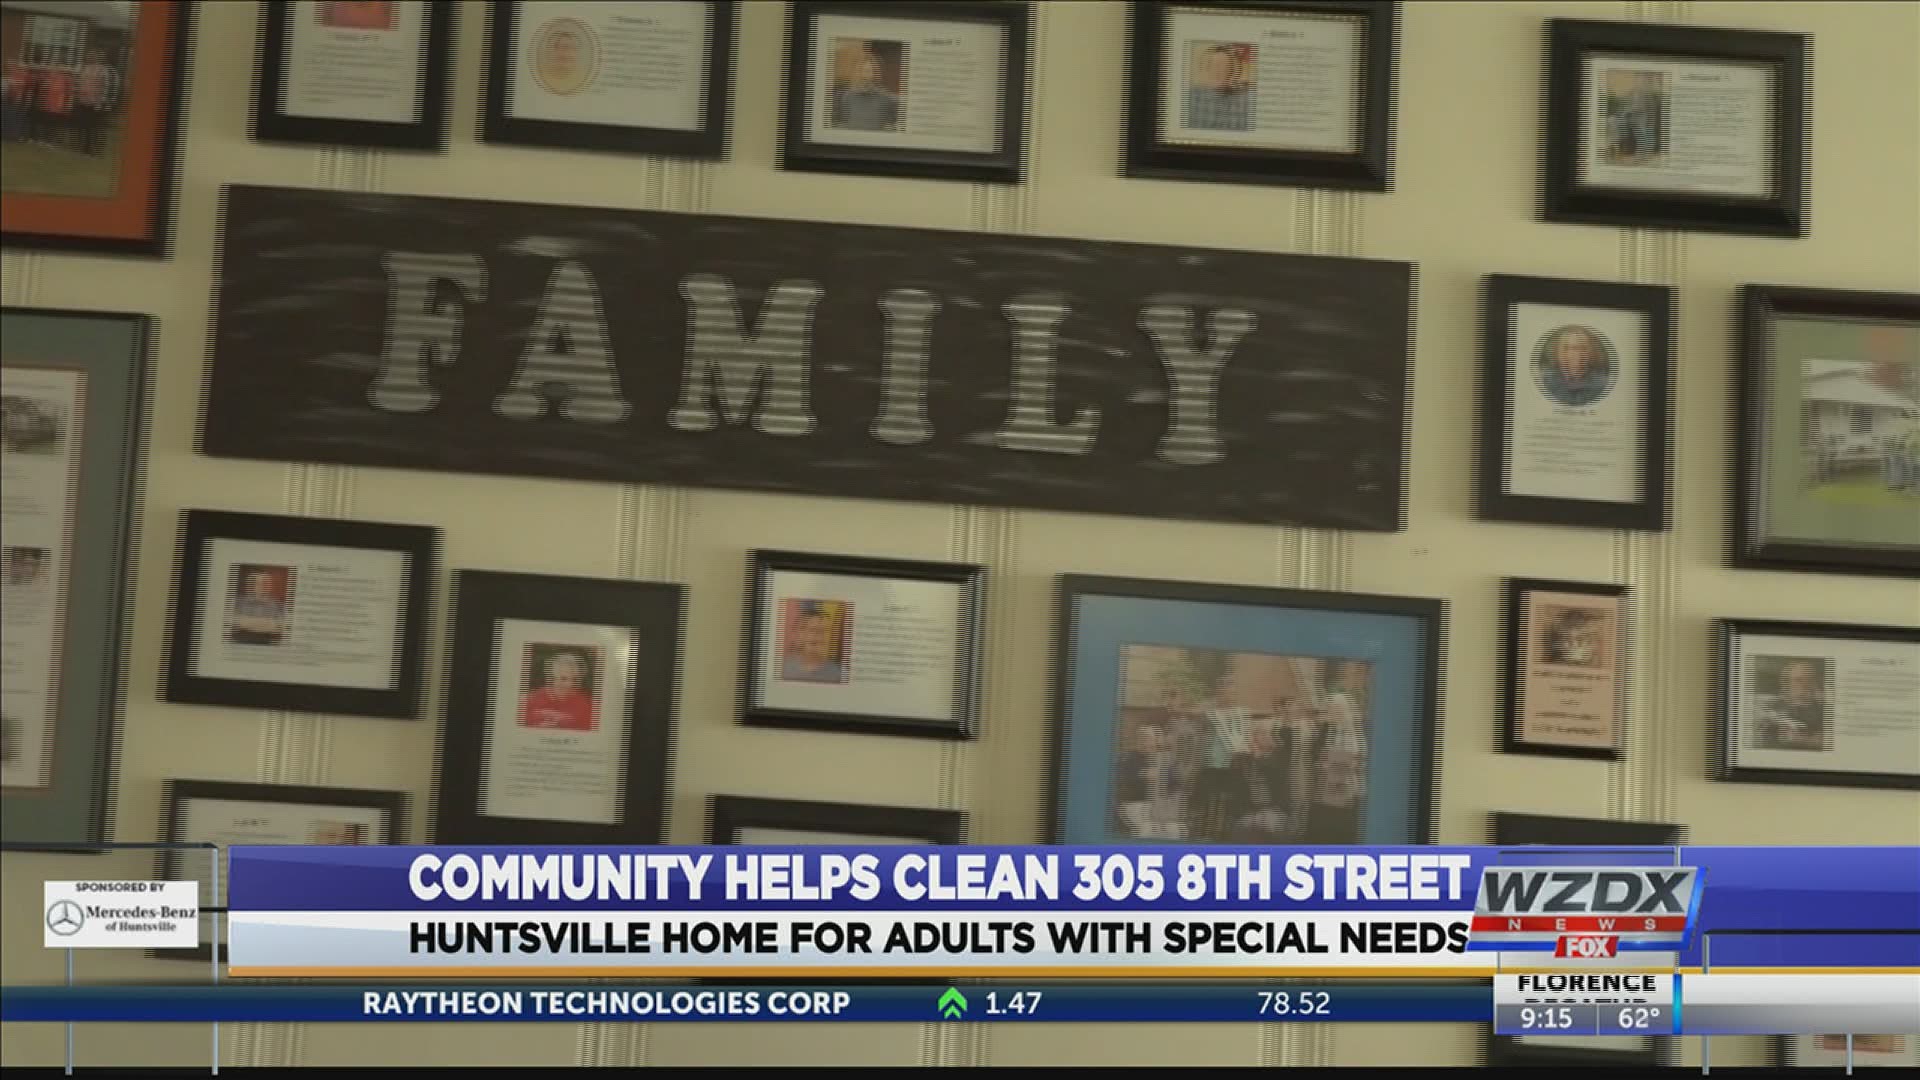 While a lot of cleaning was done at 305 8th Street, an organization that houses adults with disabilities, they still need help from the community.